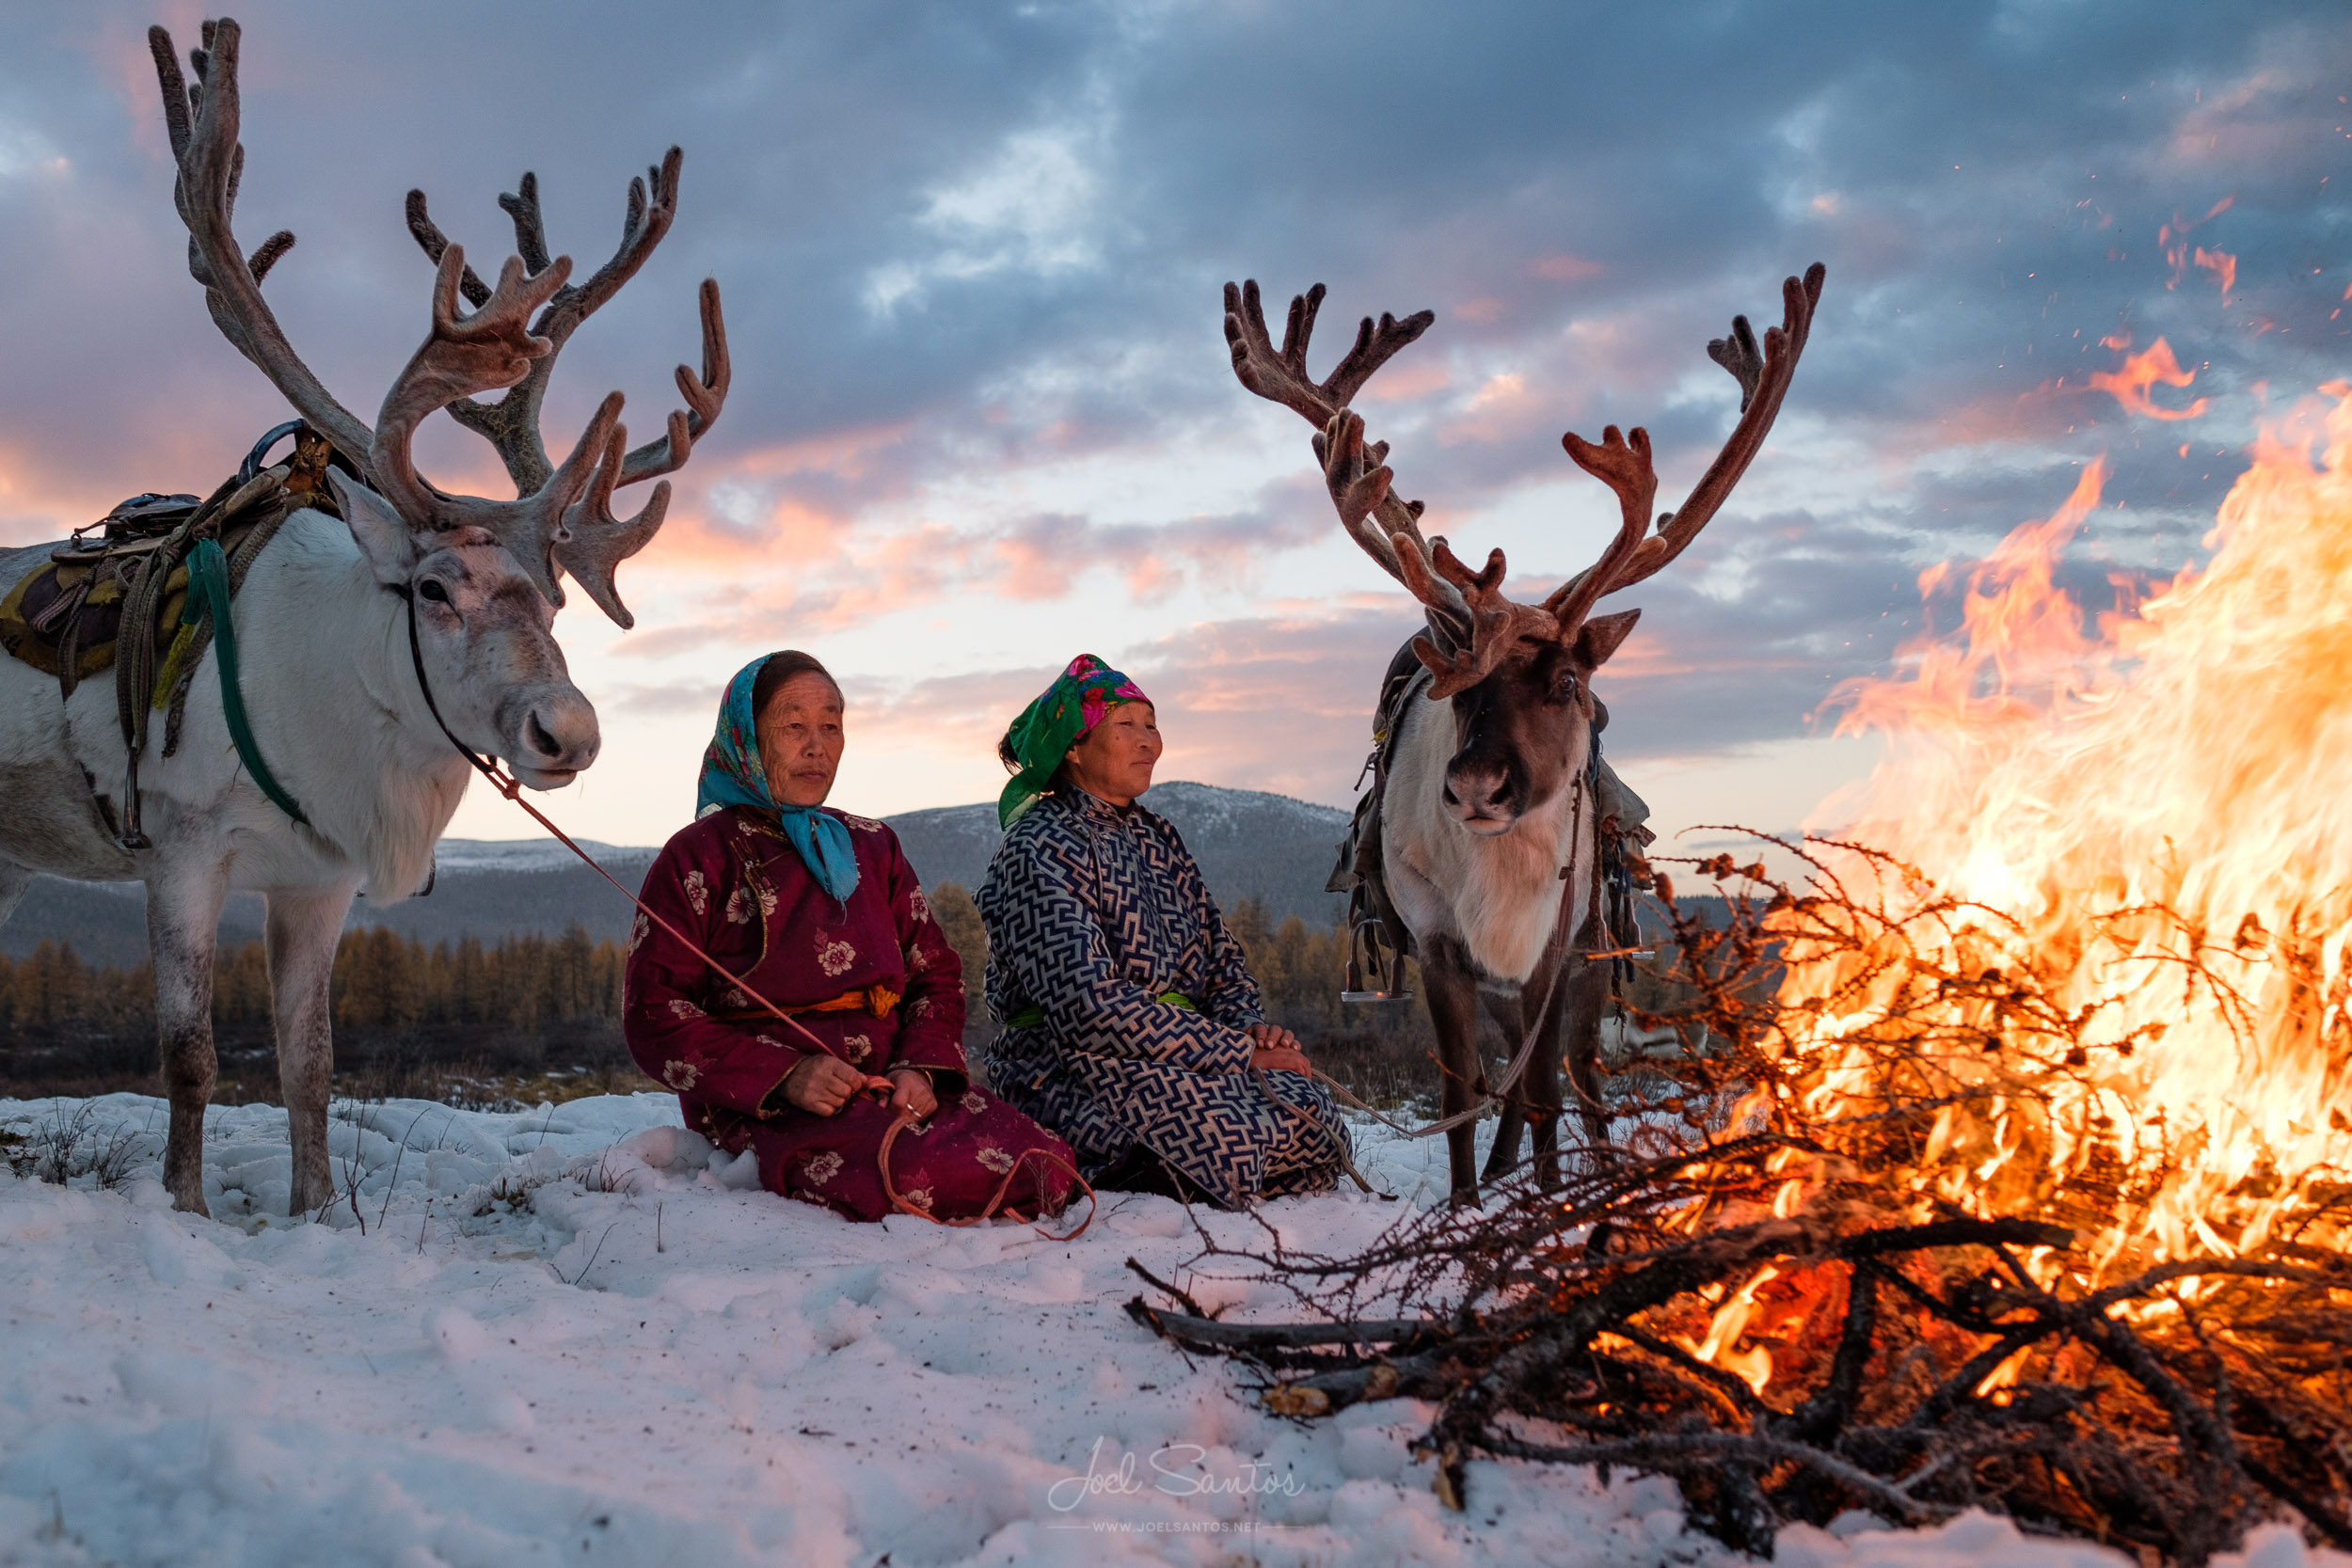 Two Hanai herders sit around a campfire in the snow with their two reindeers